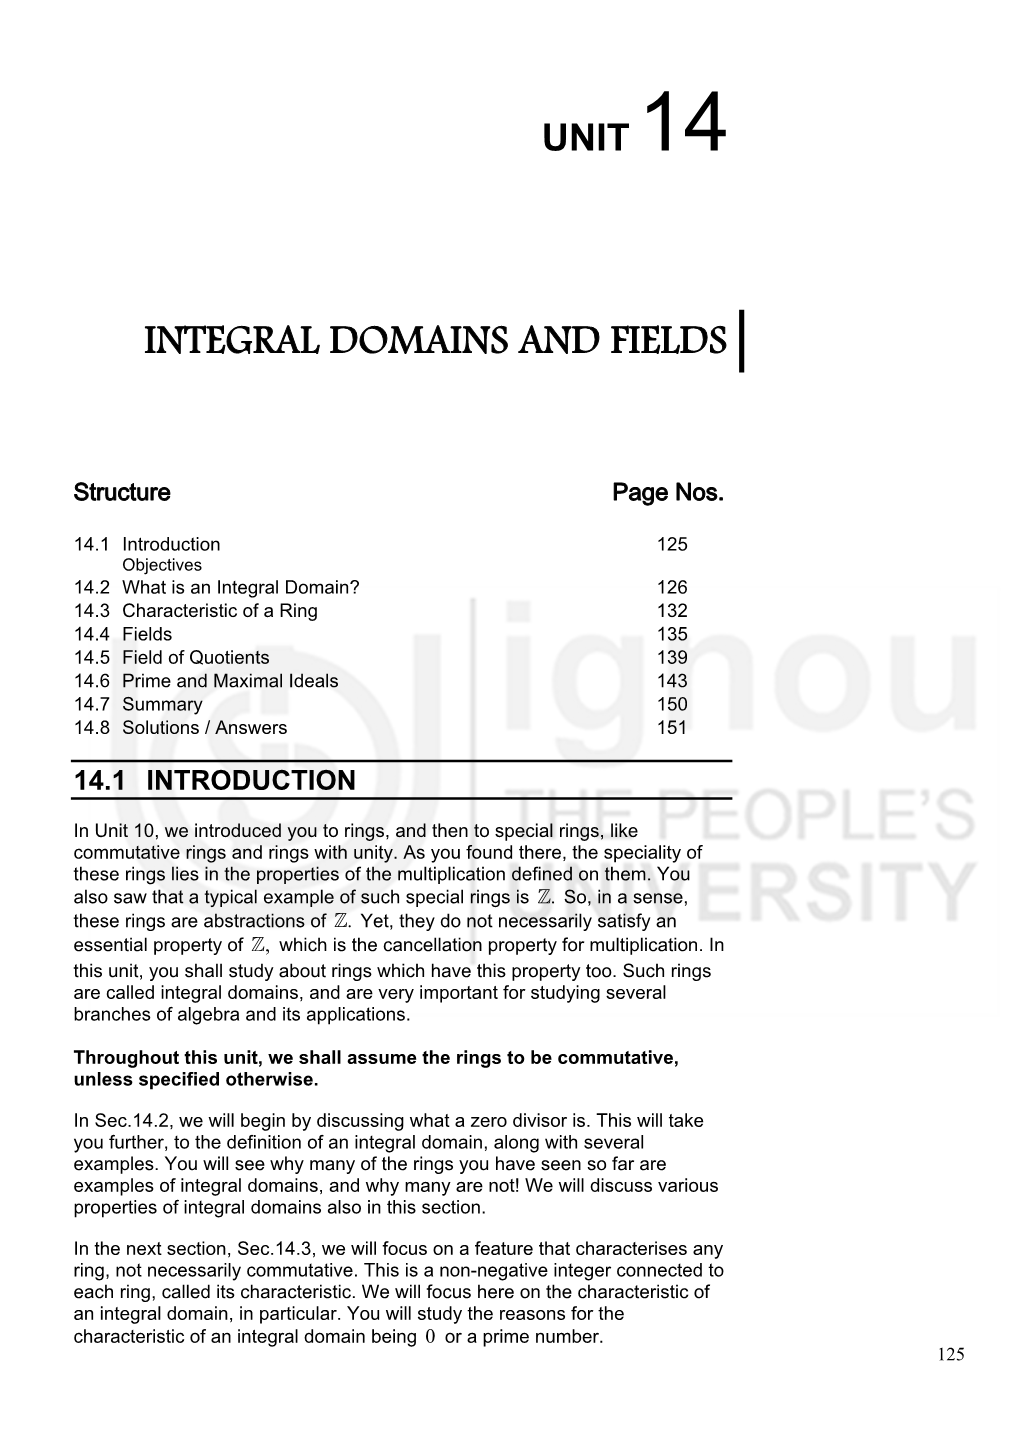 Integral Domains and Fields